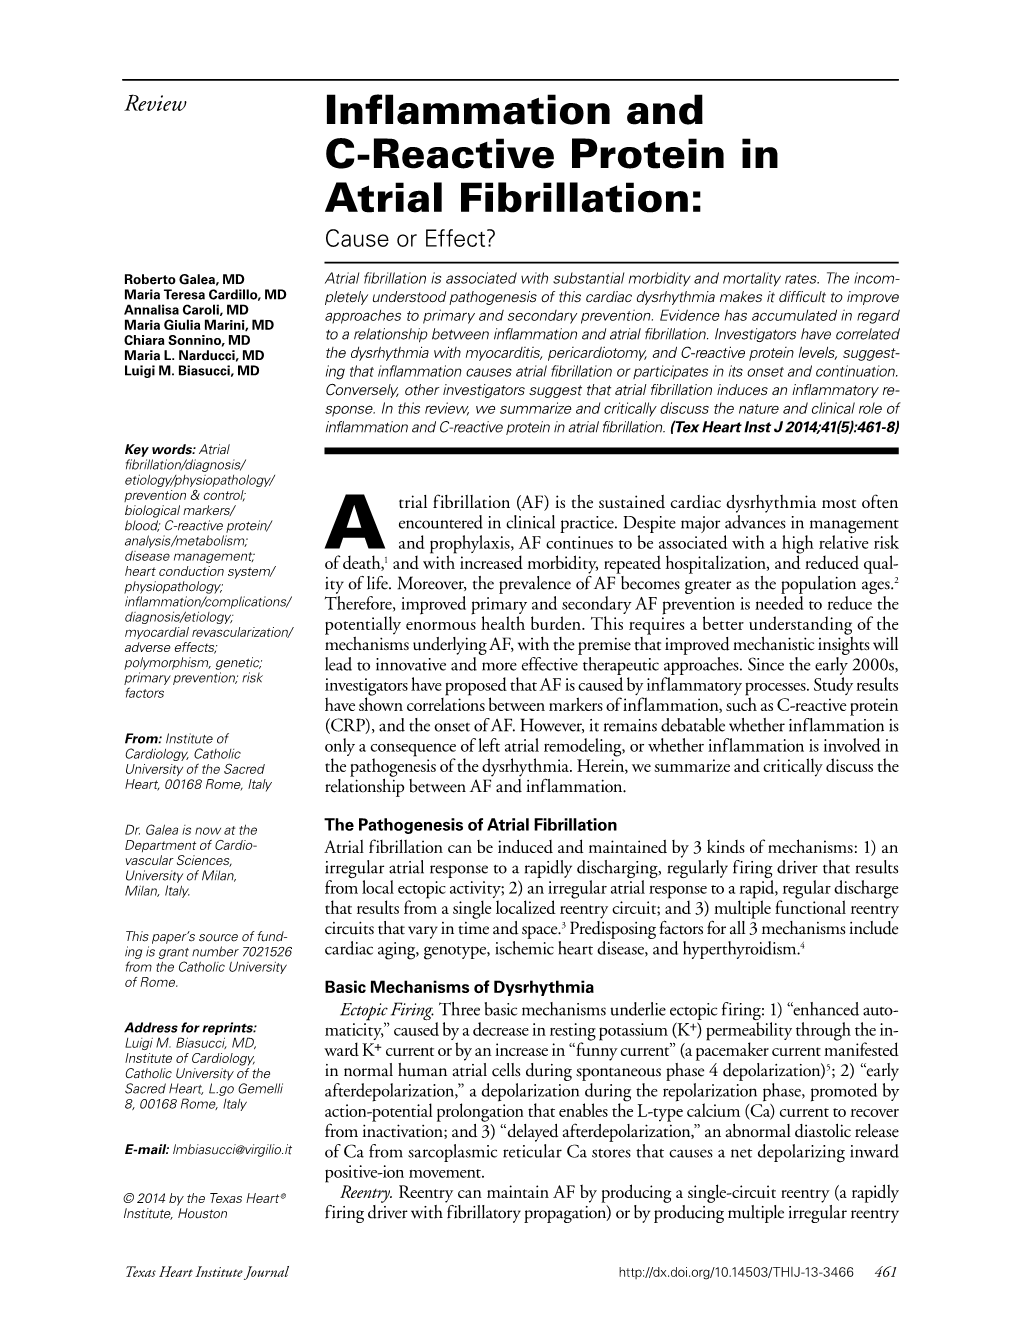 Inflammation and C-Reactive Protein in Atrial Fibrillation: Cause Or Effect?